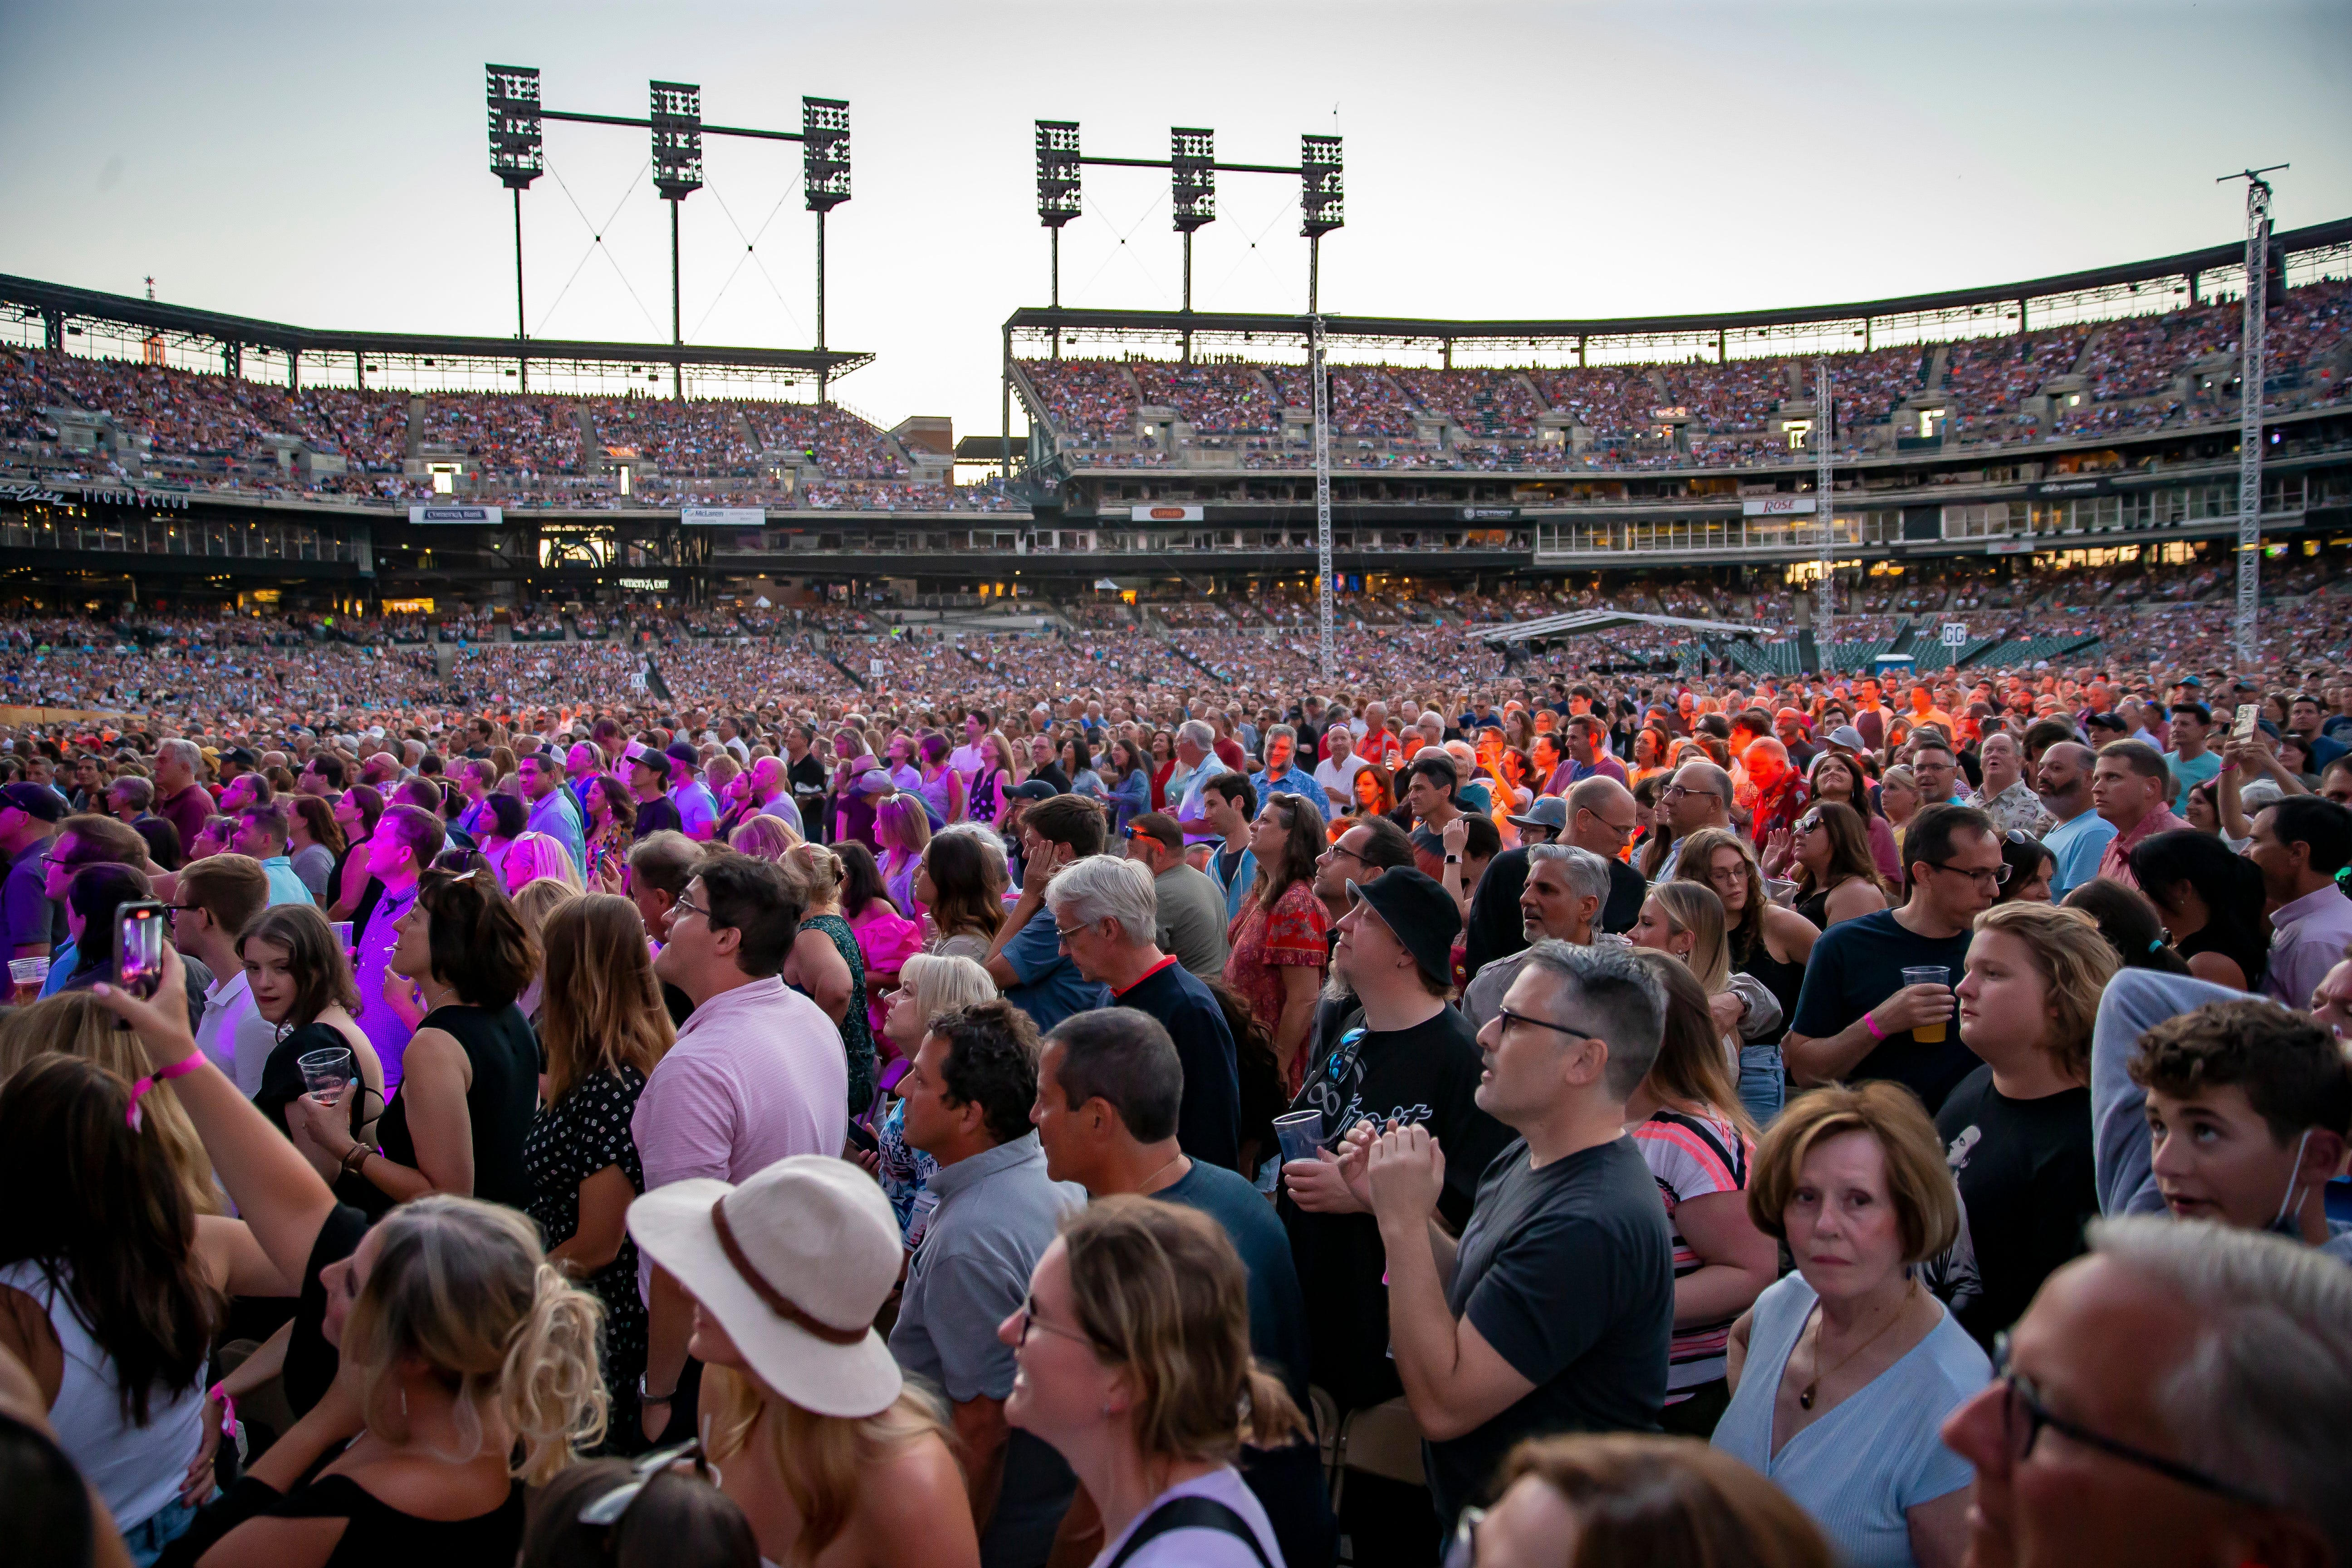 The ballpark was packed as fans watch Billy Joel in concert at Comerica Park in Detroit.